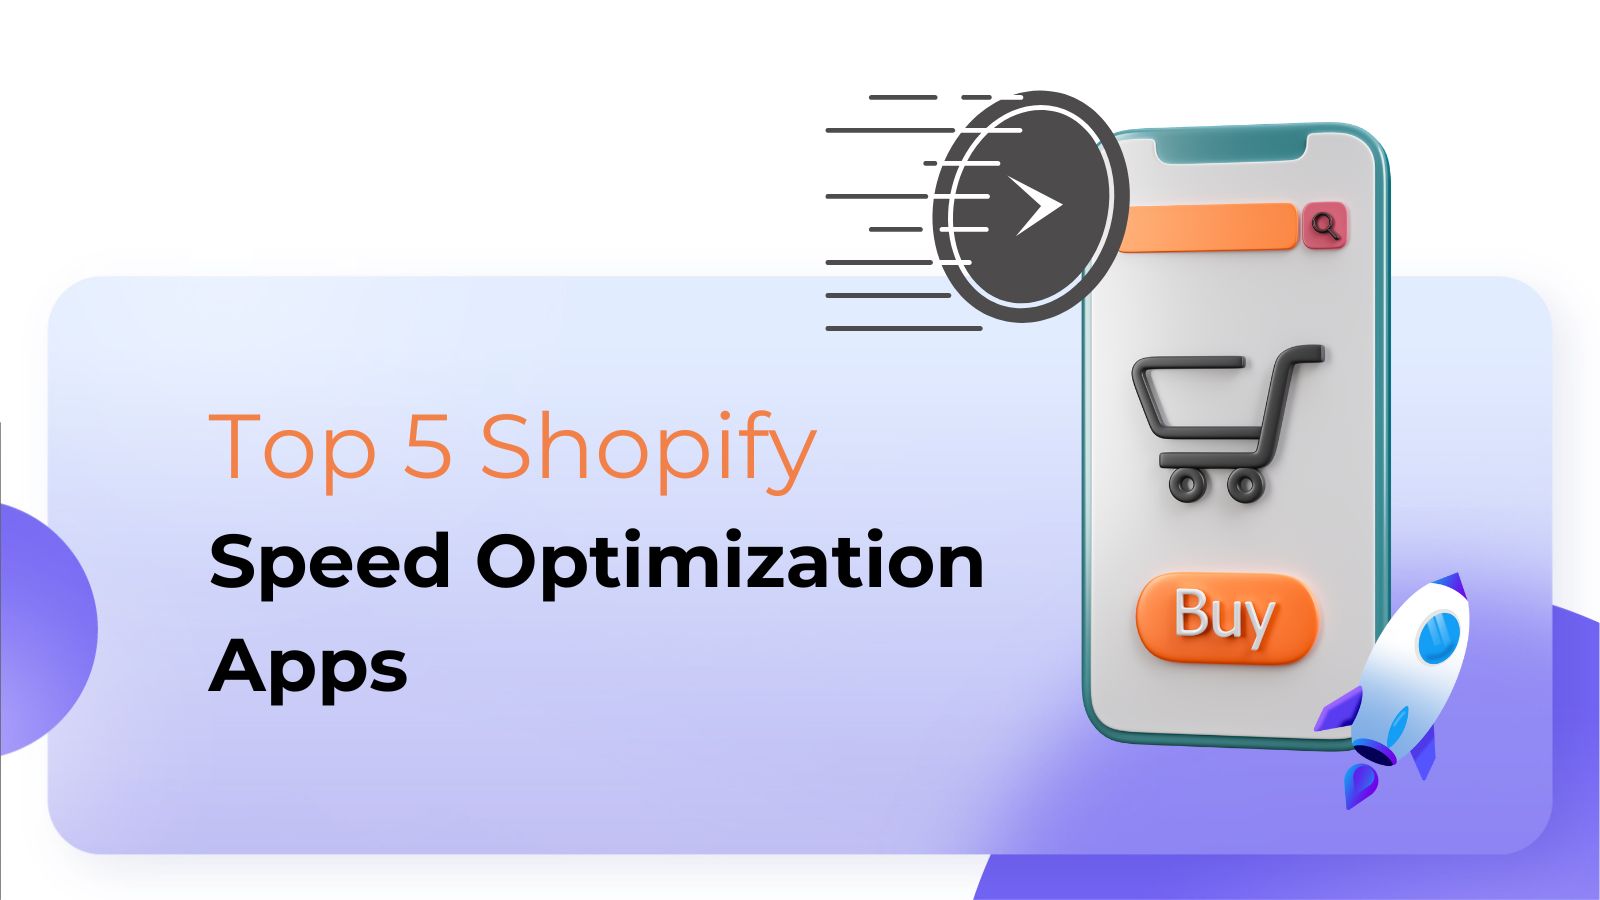 Top 5 Shopify speed optimization apps